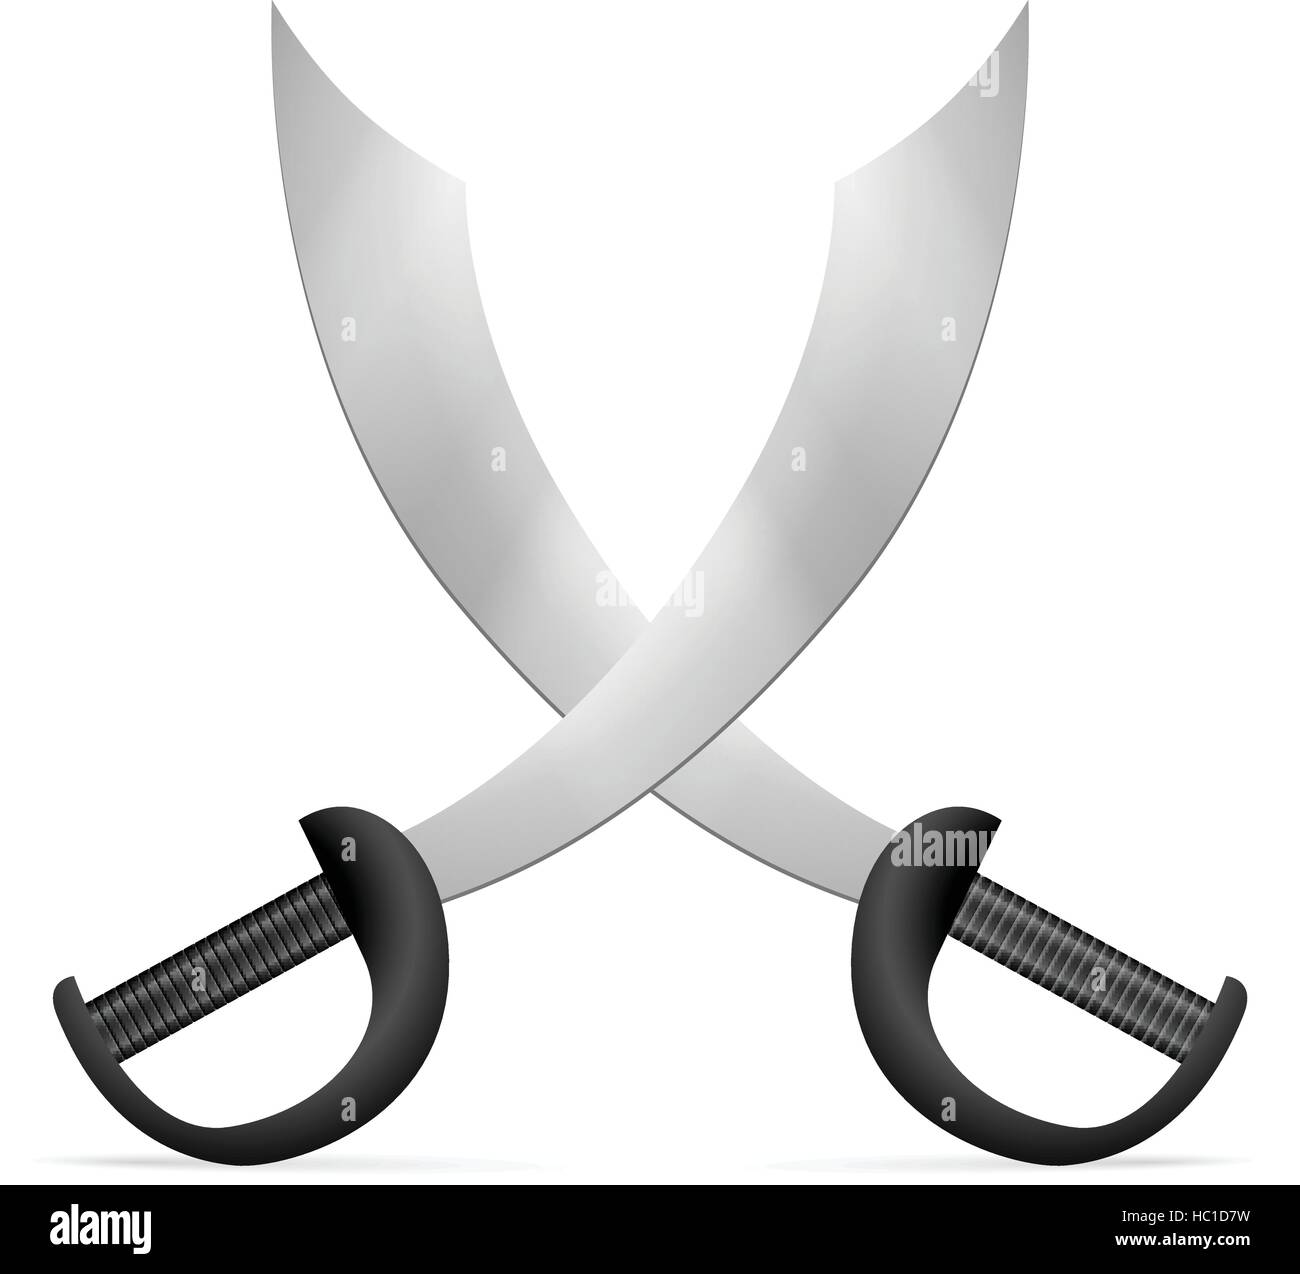 Swords on a white background. Vector illustration. Stock Vector